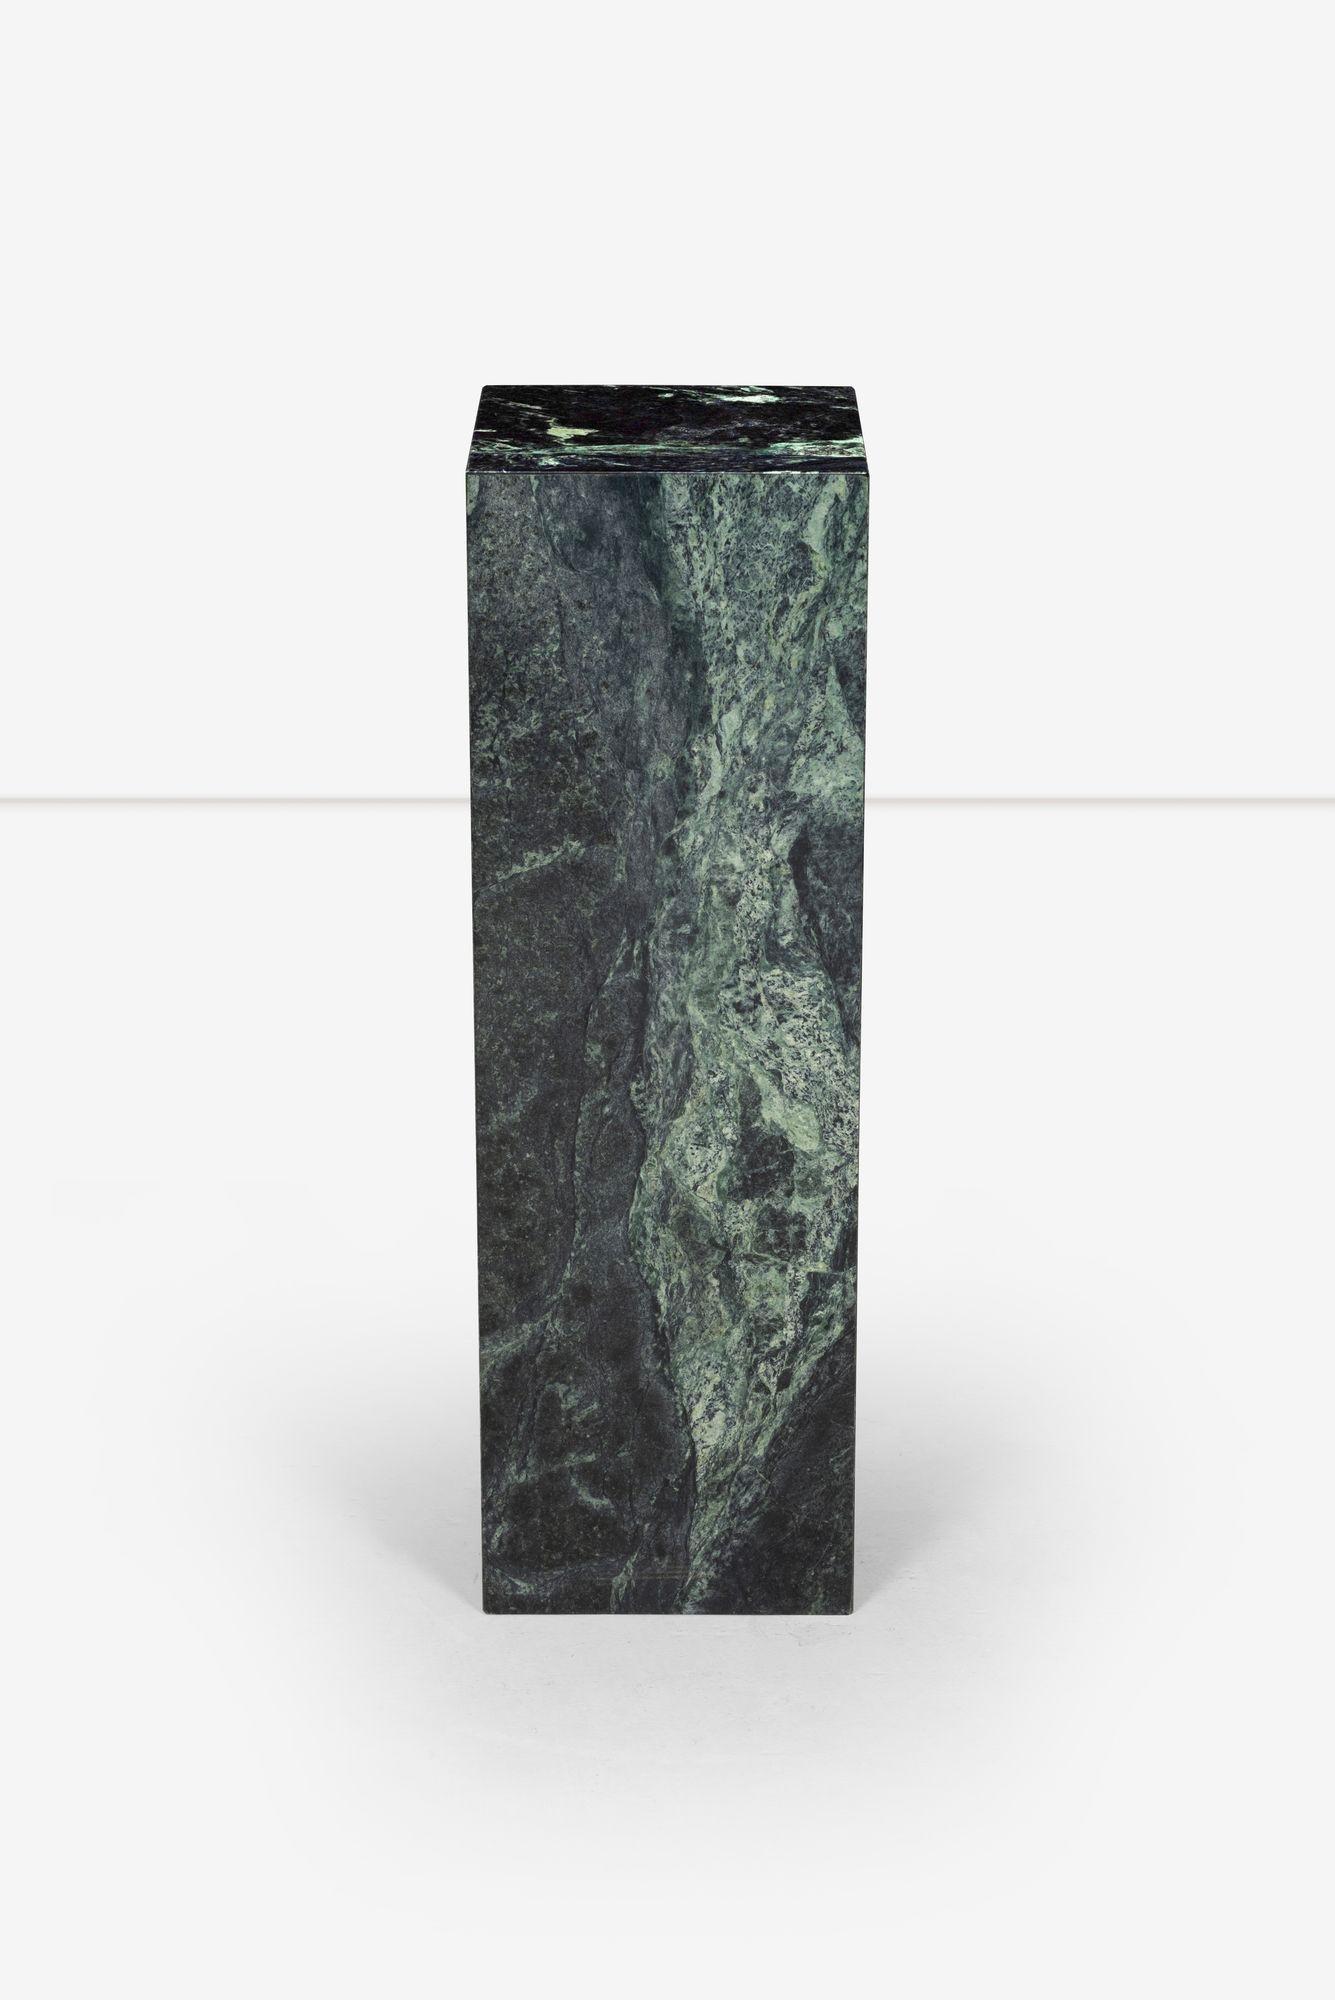 Verdi Alpi Marble Pedestal, Mangiarotti Style
Italian marble extracted in northern Italy. It presents different tonalities of green, enriched by delicate lighter veining giving it a unique look. Ideal for internal spaces.